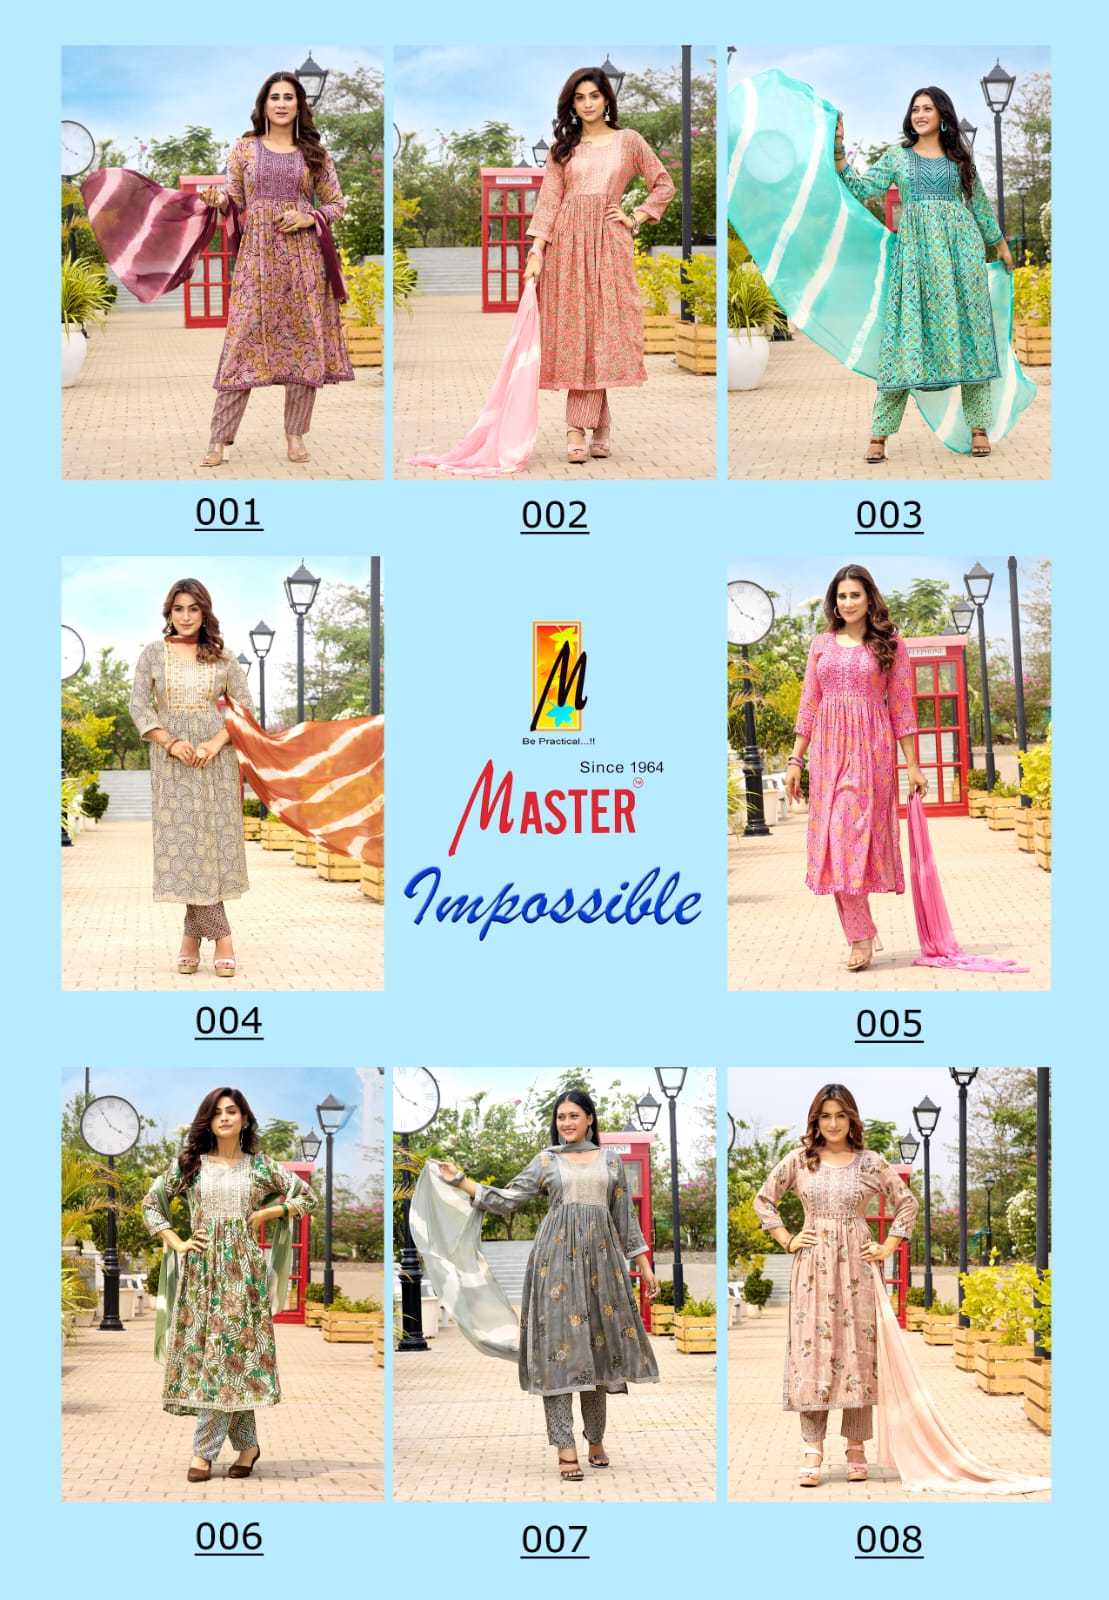 IMPOSSIBLE BY MASTER STYLISH NAYRA CUT RAYON FOIL PRETTY LOOK READYMADE 3PCS DRESS